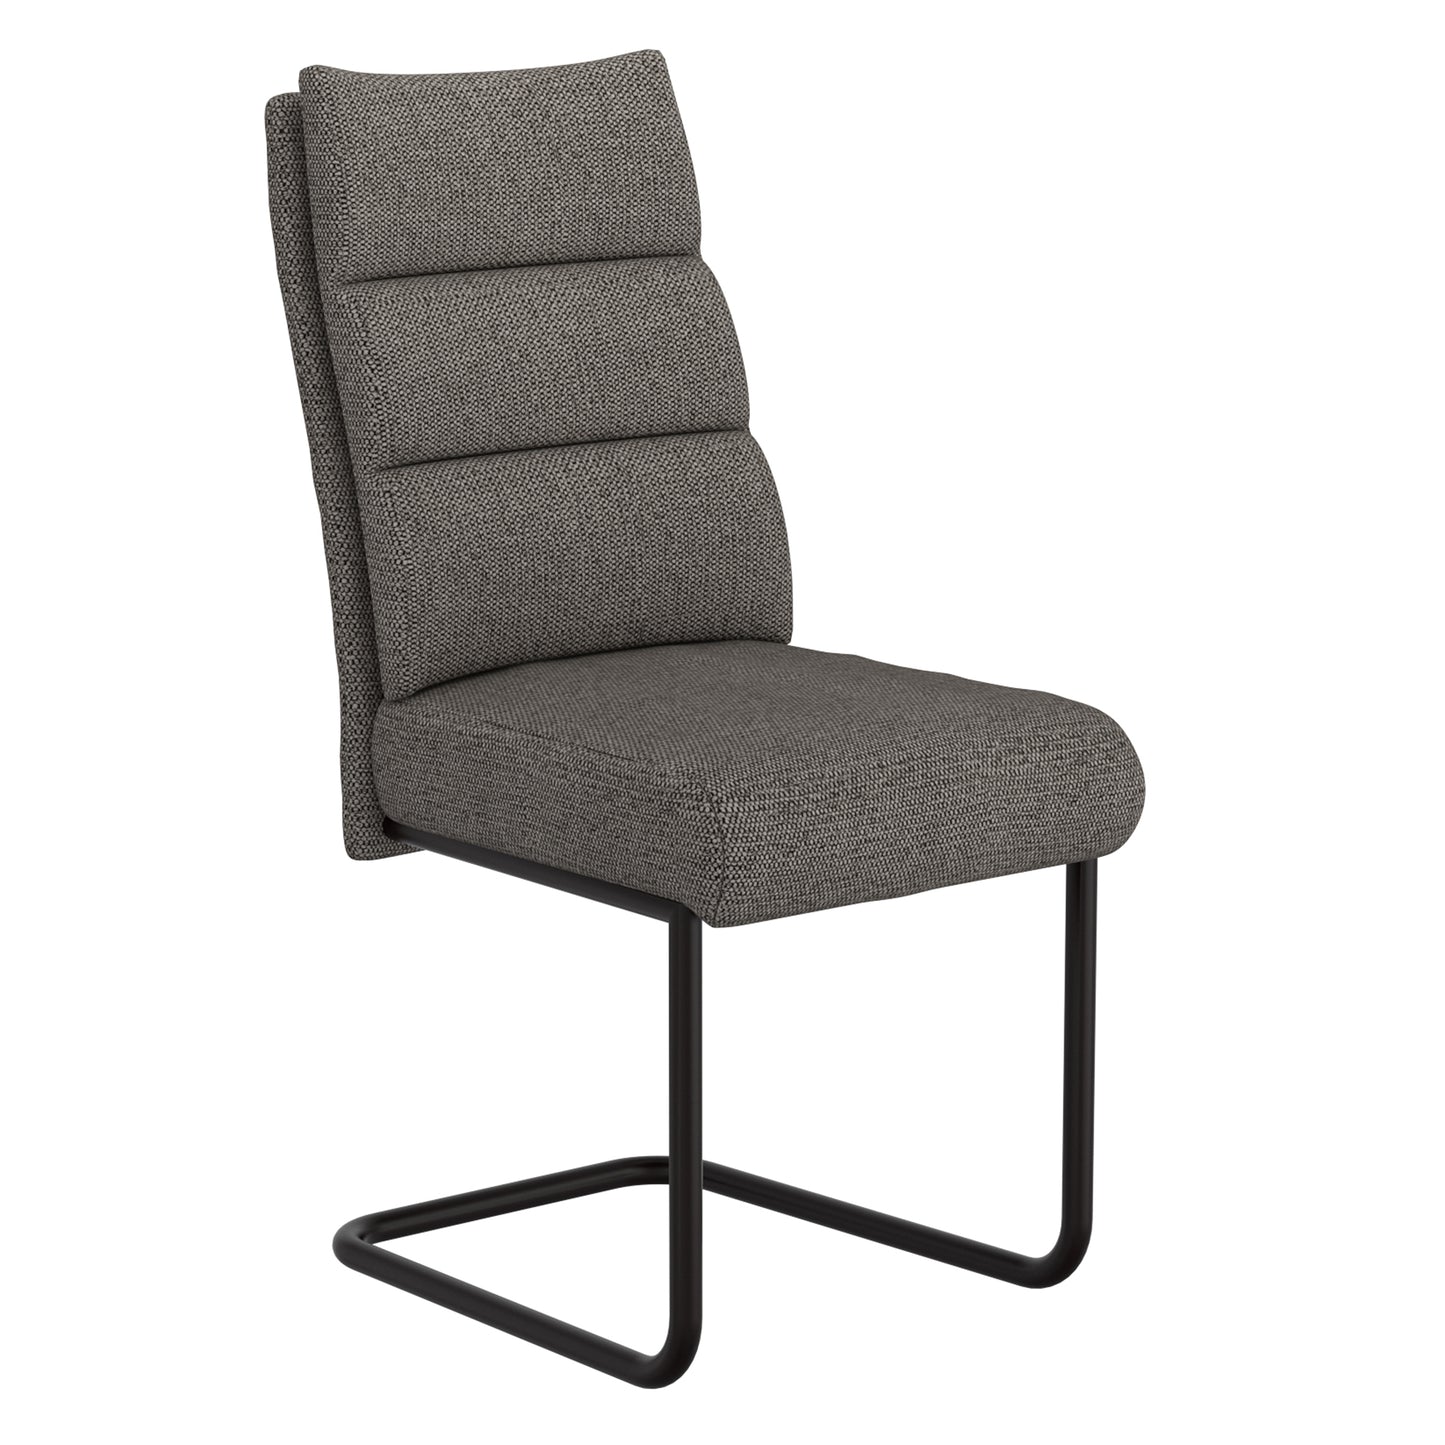 Brodi Dining Chair, set of 2, in Charcoal and Black